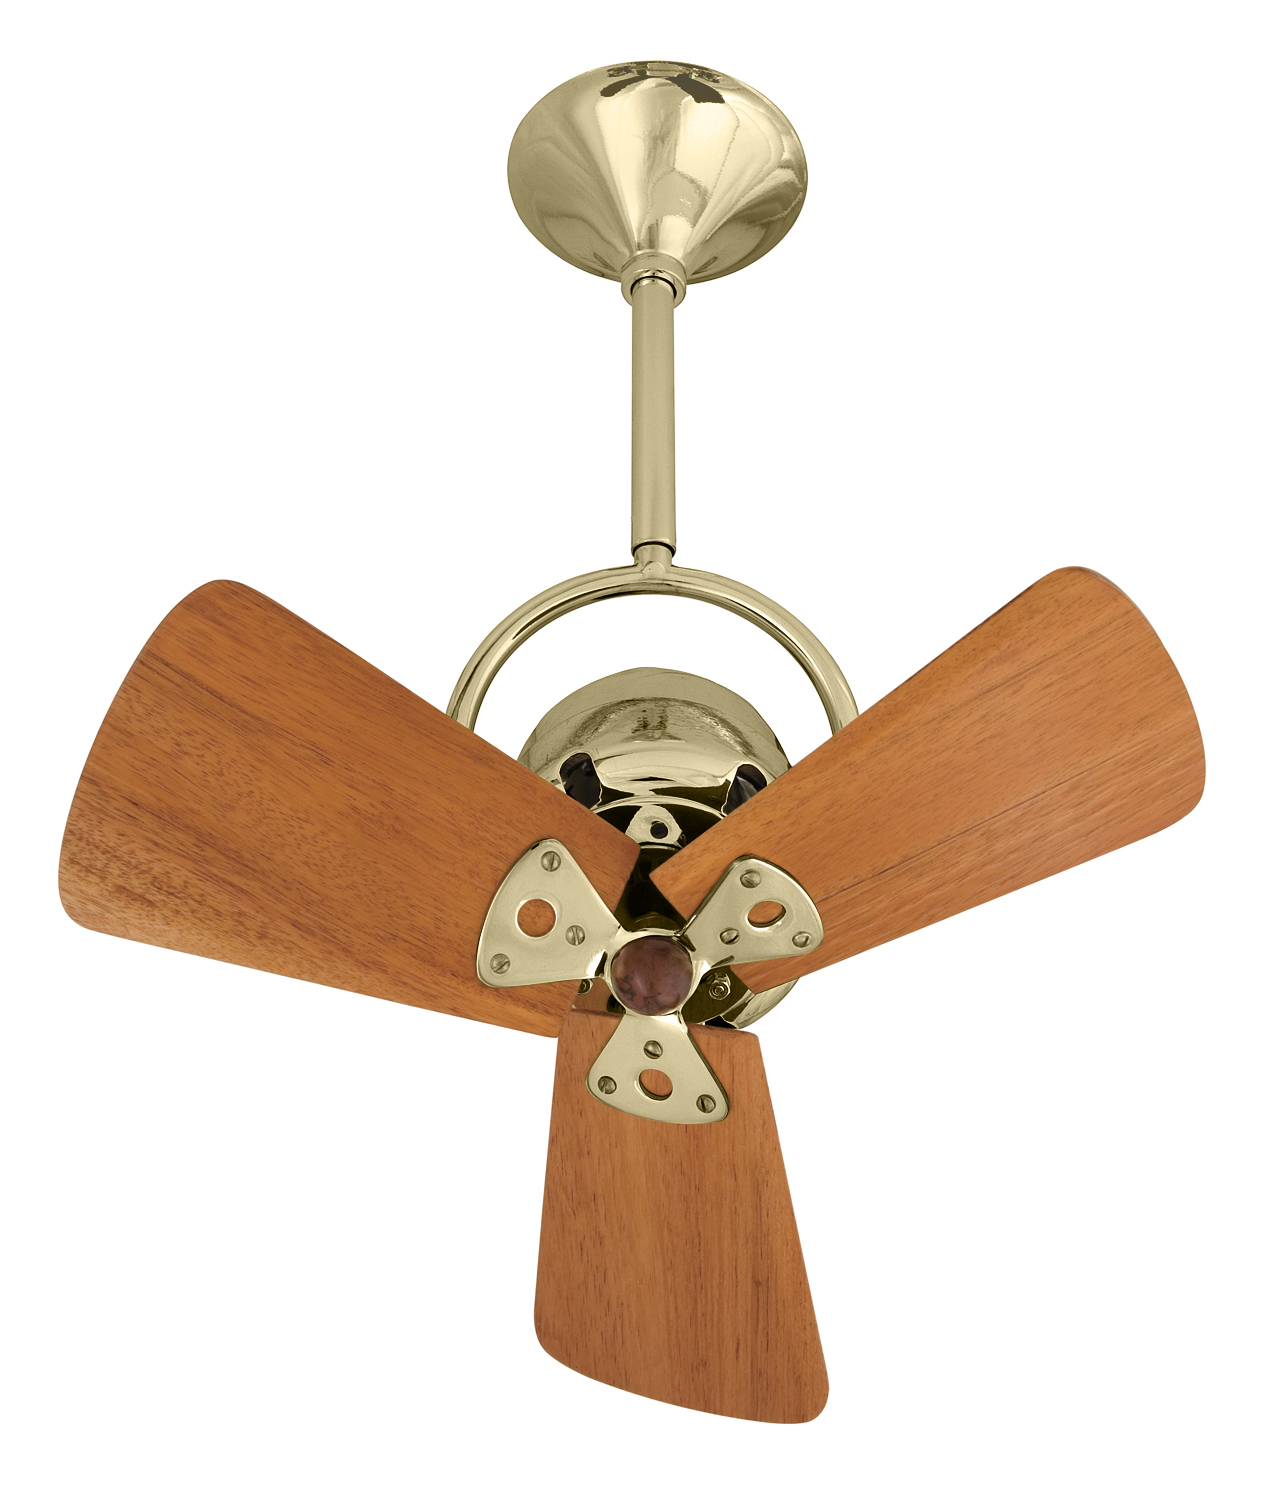 Bianca Direcional ceiling fan in Polished Brass with mahogany blades made by Matthews Fan Company.